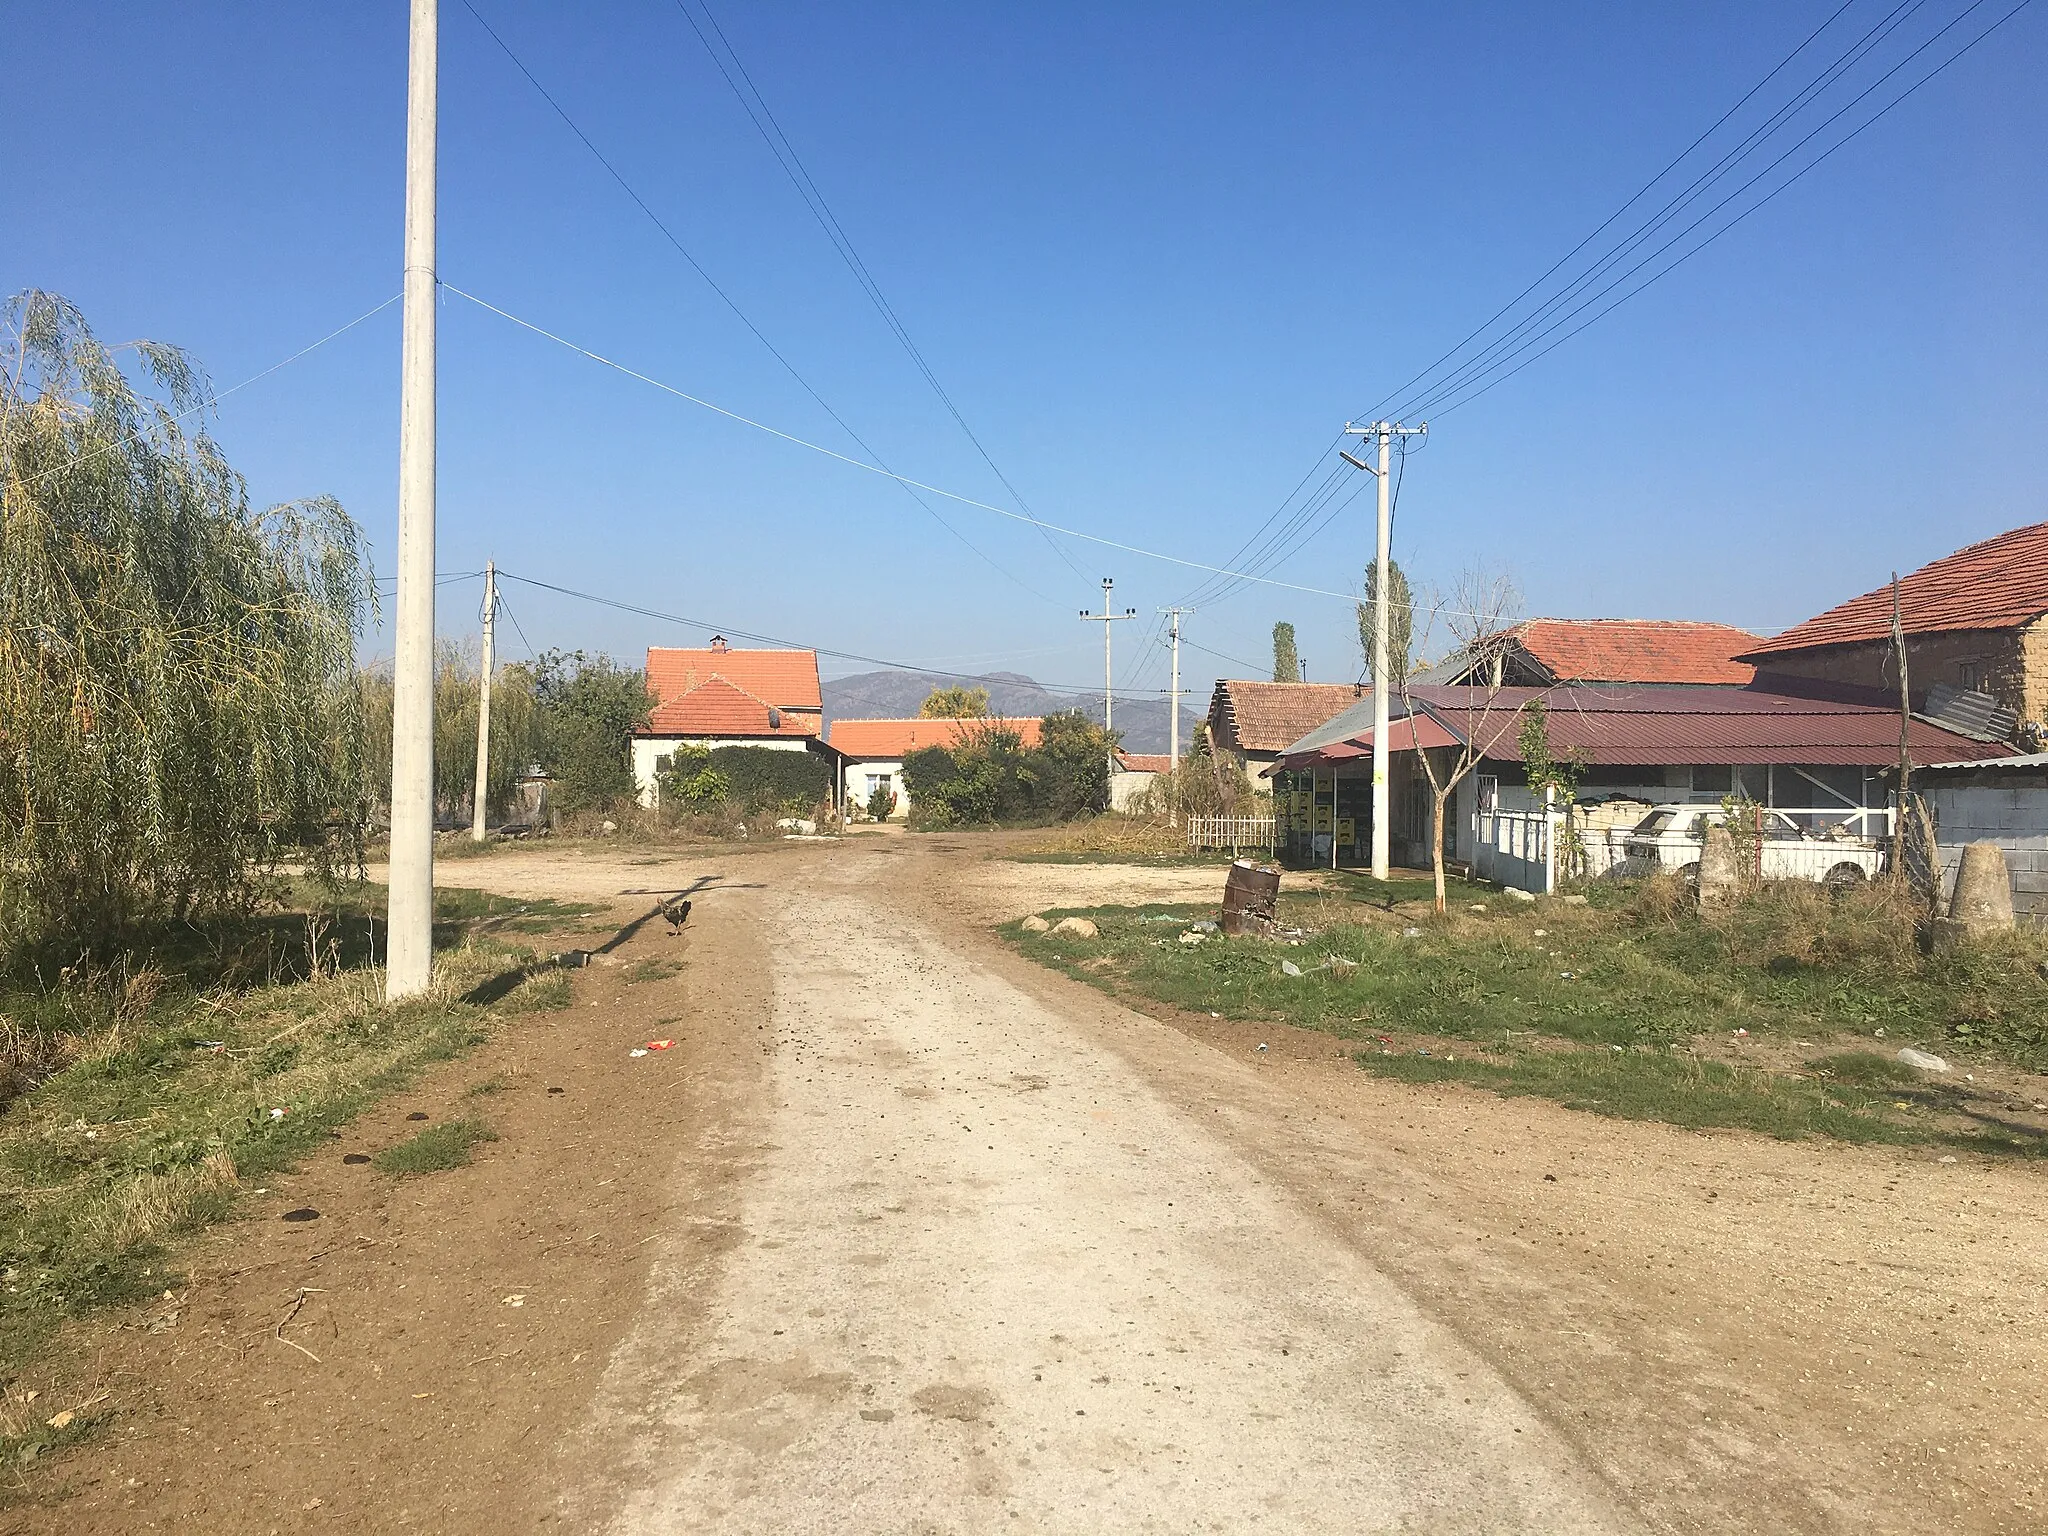 Photo showing: A view of the village of Sarandinovo